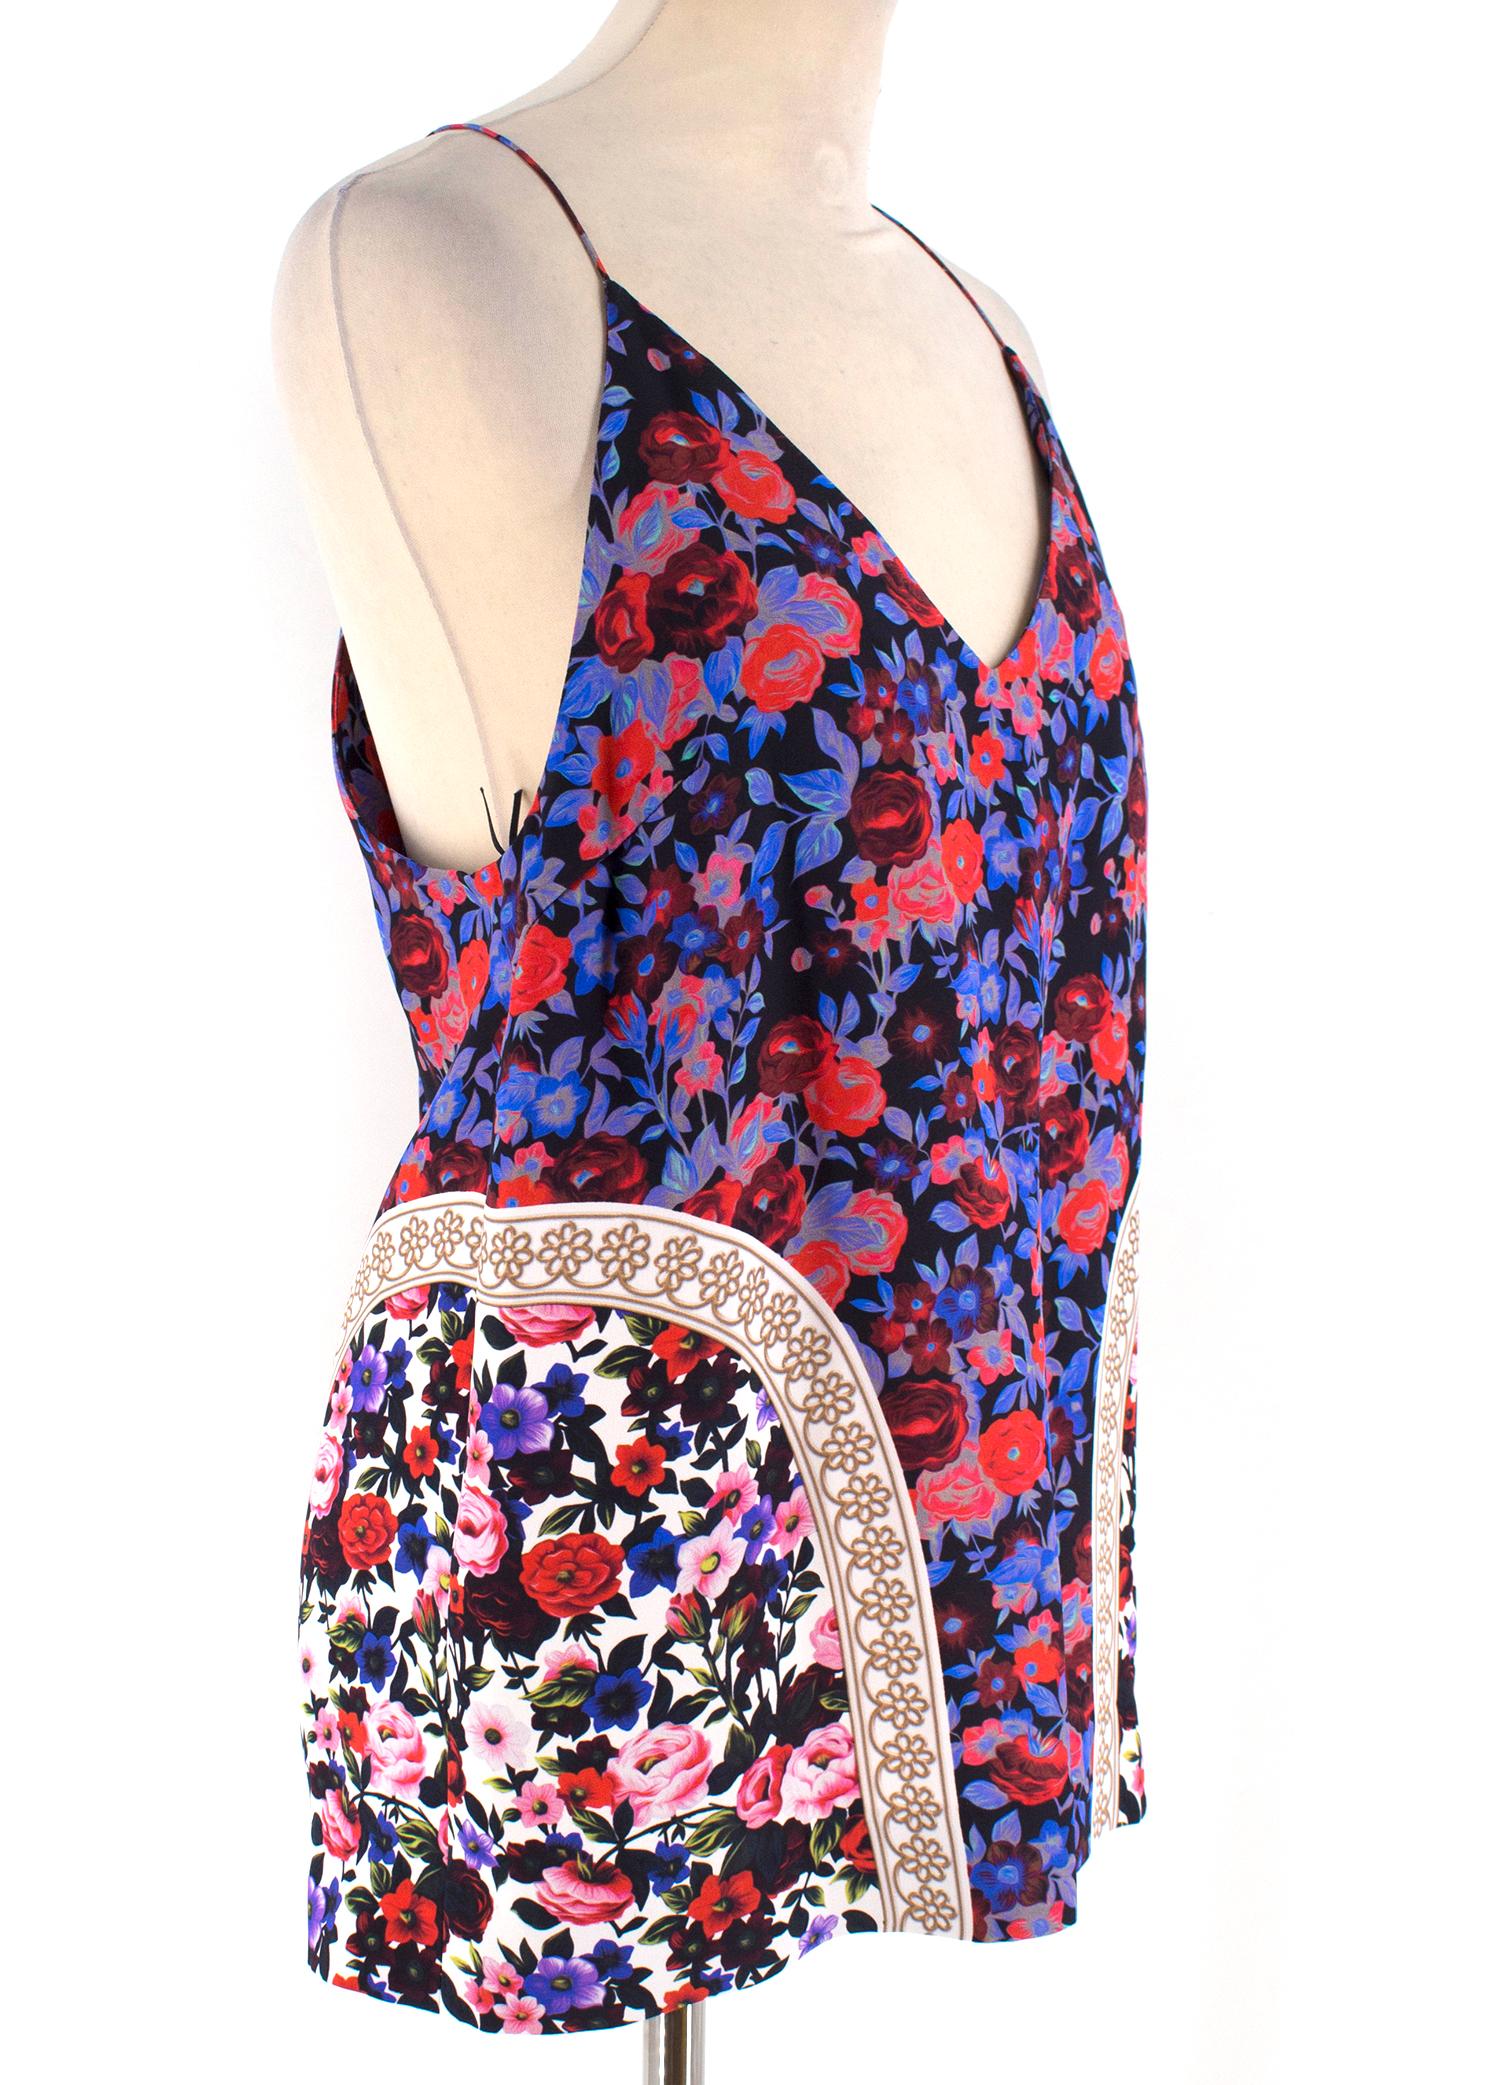 Mary Katrantzou Purple Floral Cami Top

-Purple silk cami top
-Features blue and red floral pattern
-V neck
-Spaghetti strap
-Racerback 

Please note, these items are pre-owned and may show signs of being stored even when unworn and unused. This is